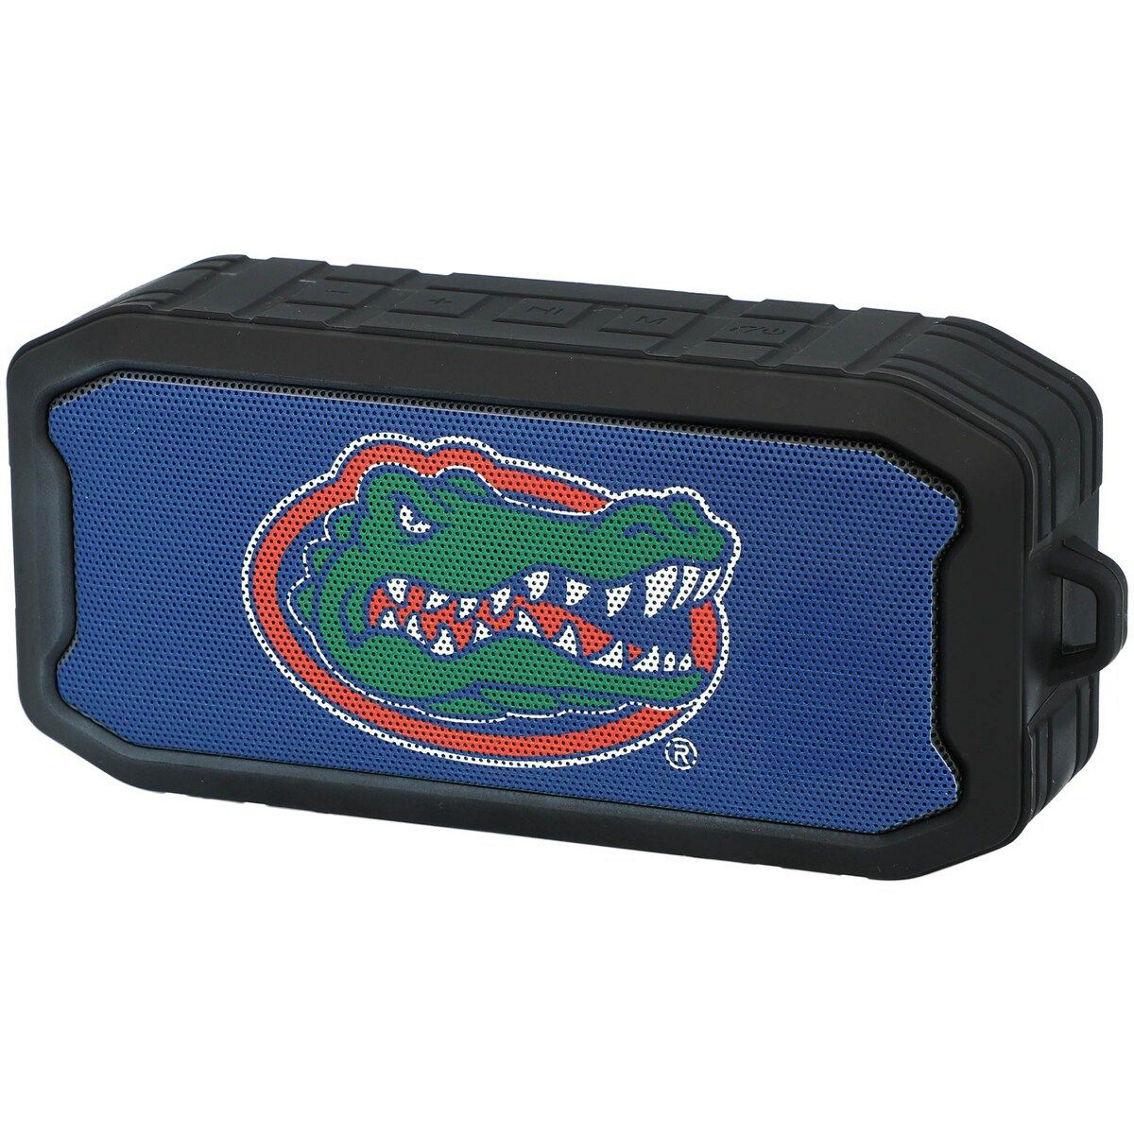 Gameday Outfitters Florida Gators Logo Bluetooth Speakers - Image 2 of 2